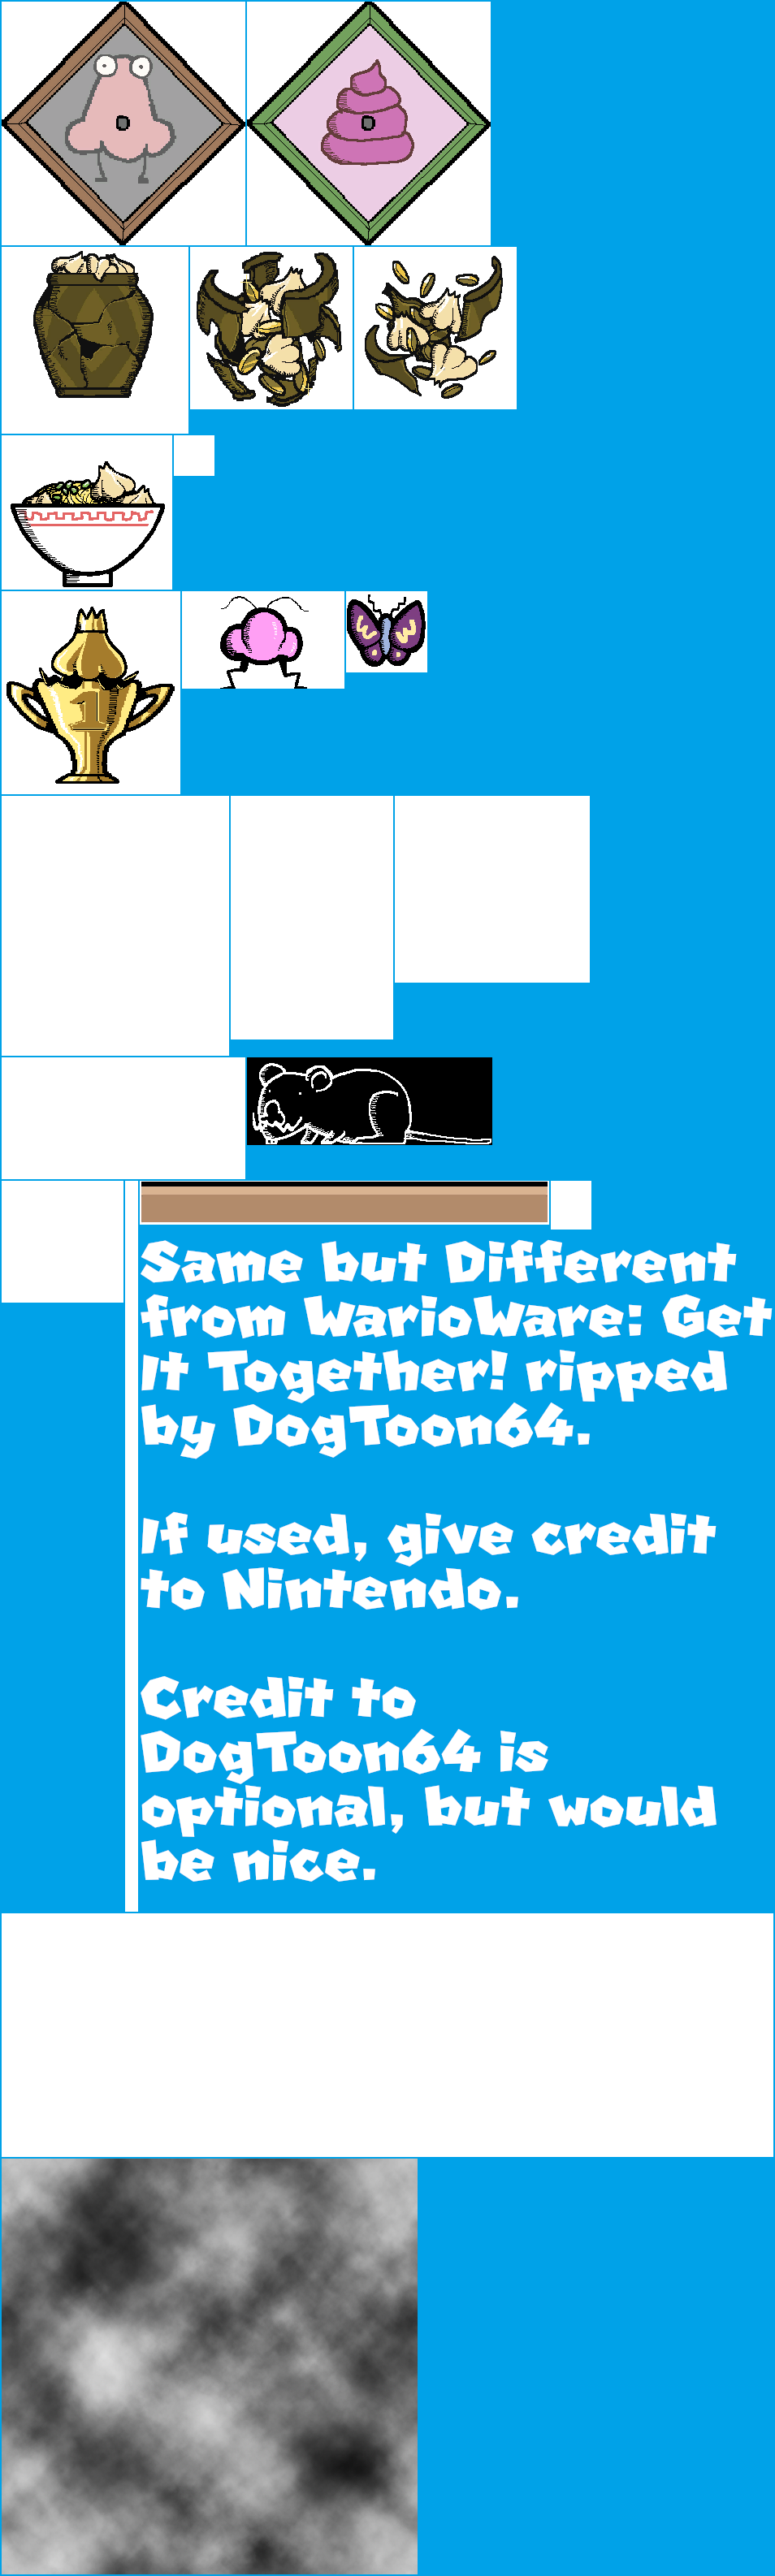 WarioWare: Get It Together! - Same but Different